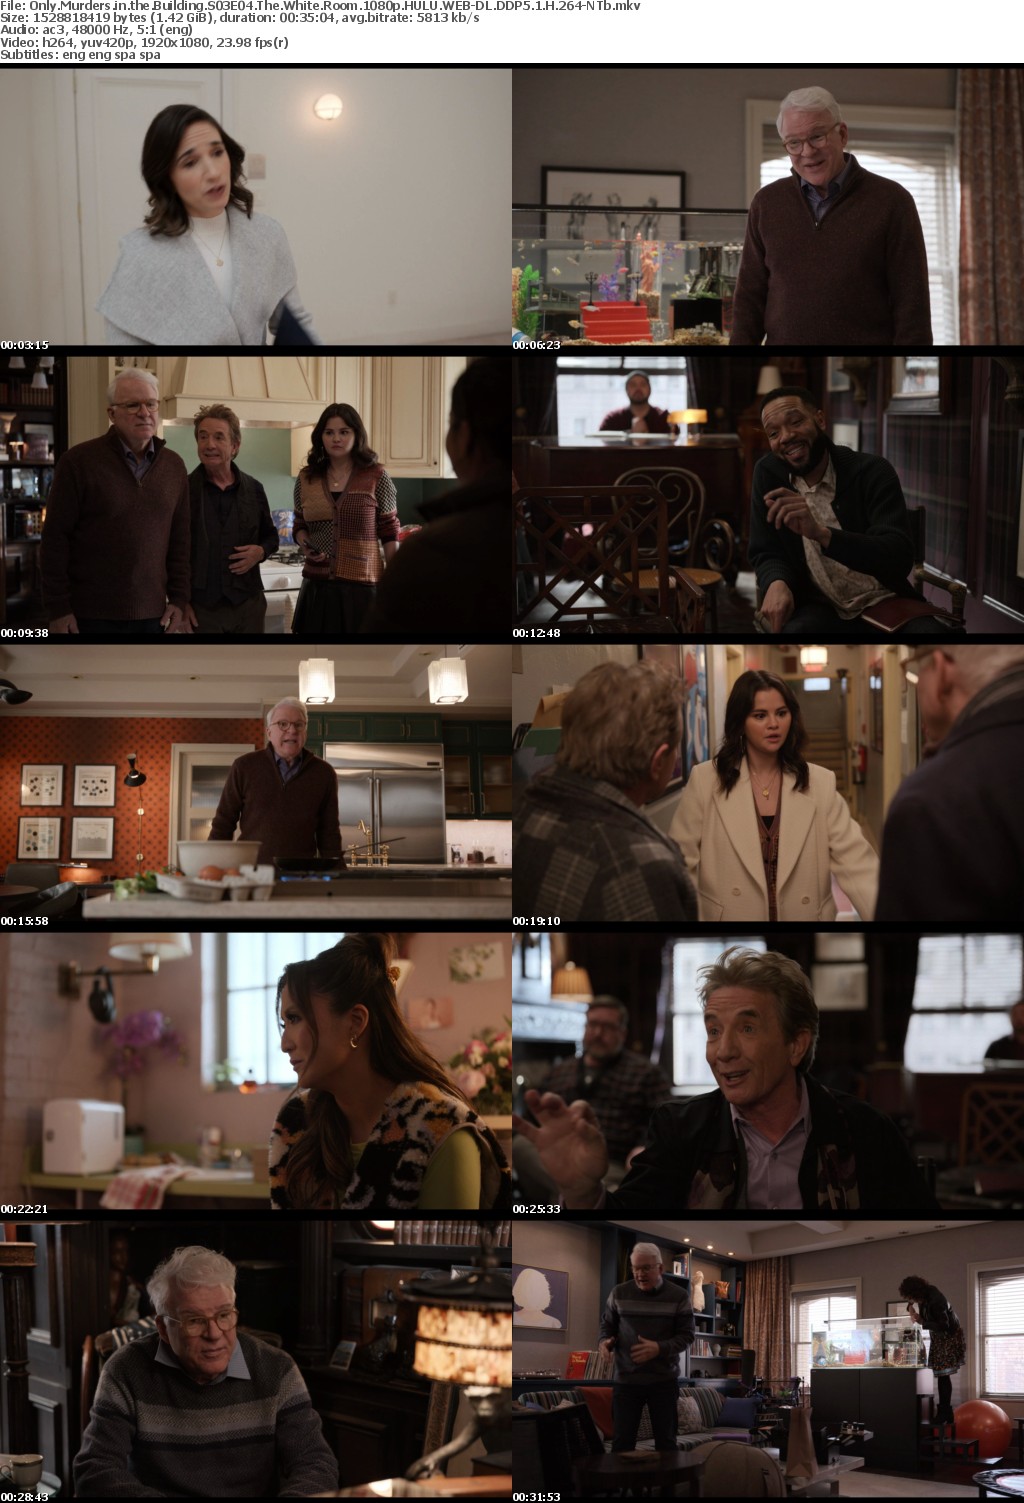 Only Murders in the Building S03E04 The White Room 1080p HULU WEB-DL DDP5 1 H 264-NTb